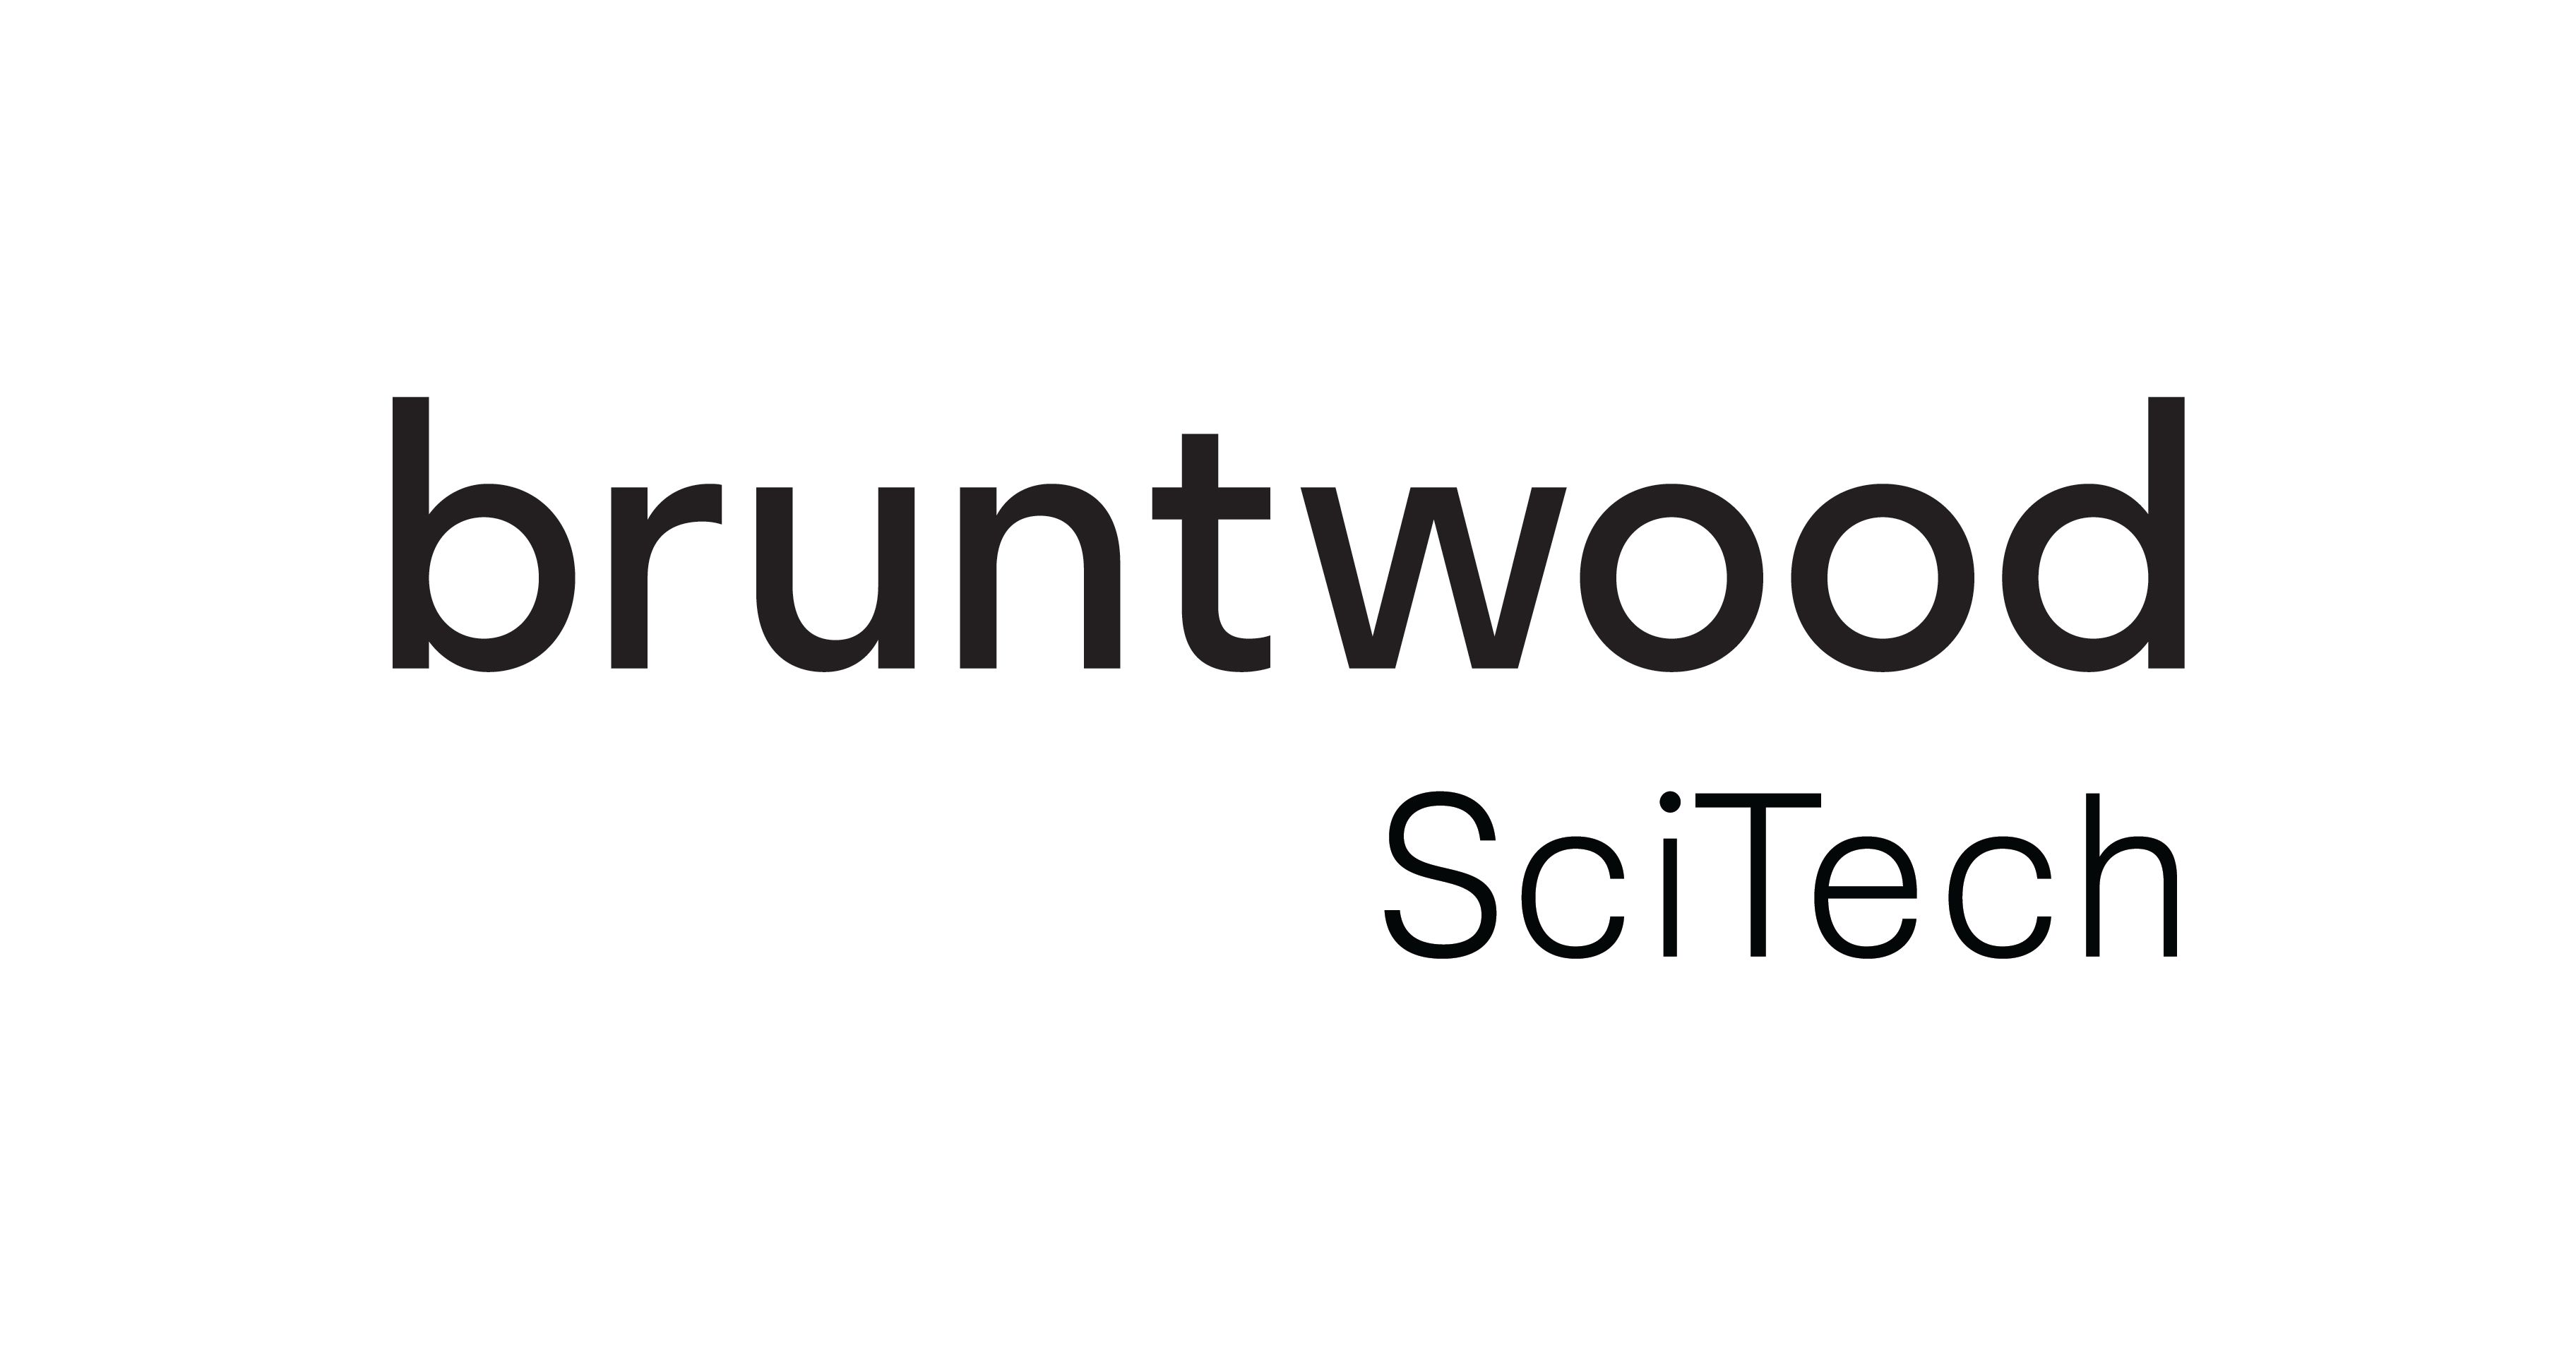 Bruntwood Sci Tech